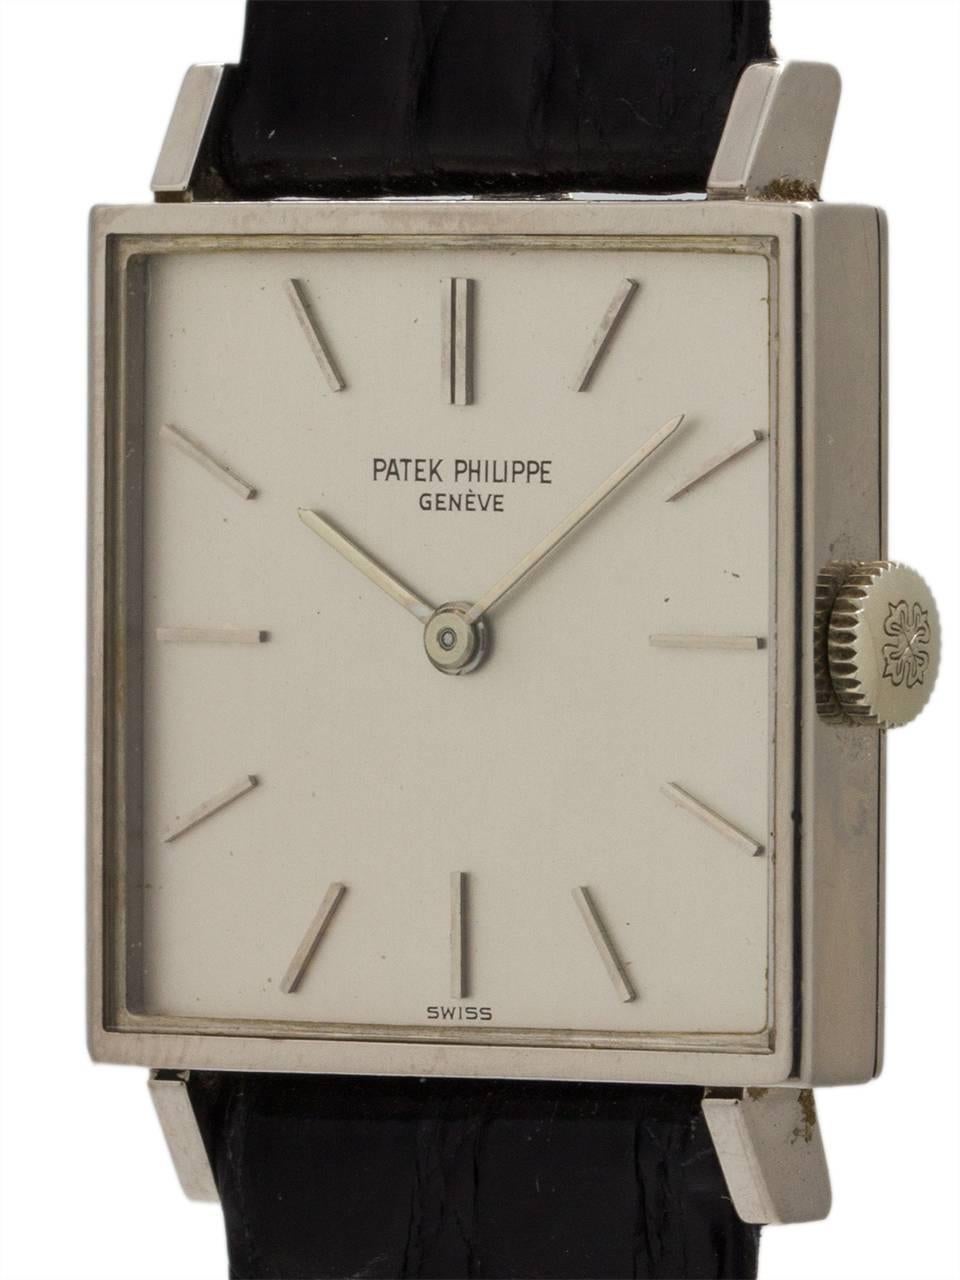 Vintage man’s Patek Philippe 18K WG manual wind dress model ref# 3430 circa 1967. Featuring a 26 x 34mm classic square case design with extended lugs. Featuring a pristine condition original silvered satin dial with applied simple silver indexes and